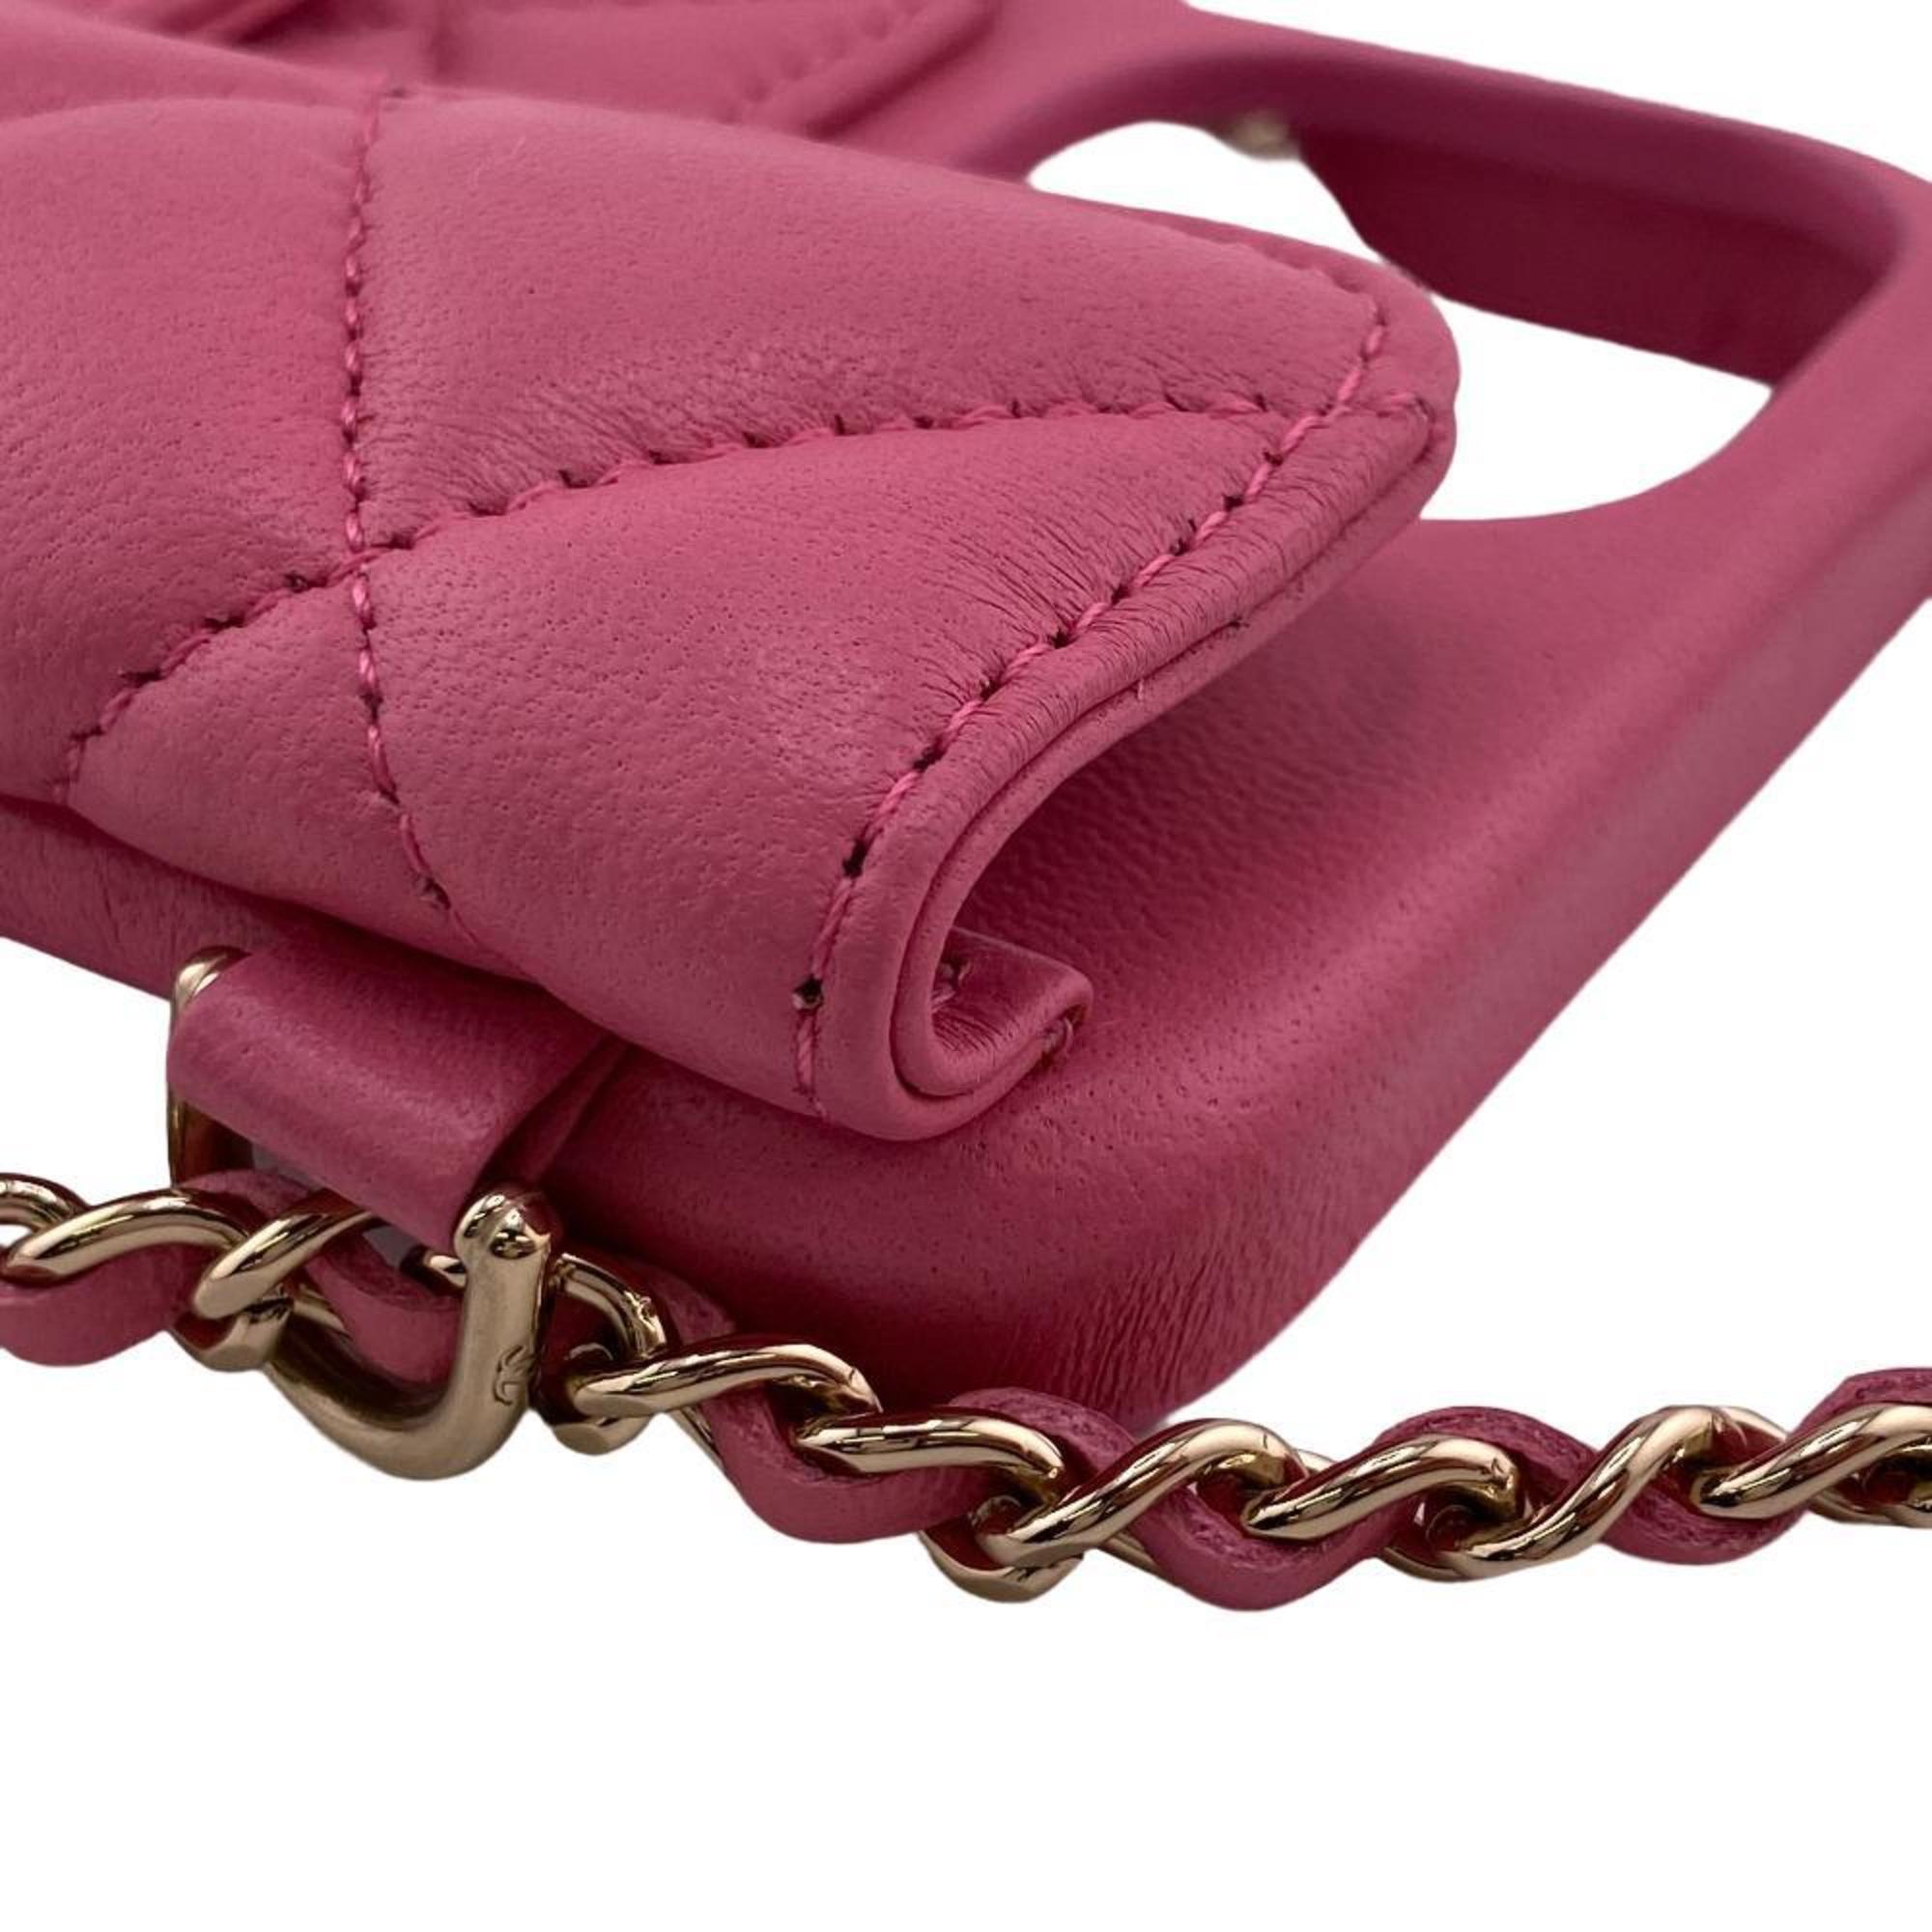 CHANEL Chanel Matelasse iPhone Case iPhone12 Chain Shoulder Coco Mark Mobile/Smartphone Accessories Pink Ladies